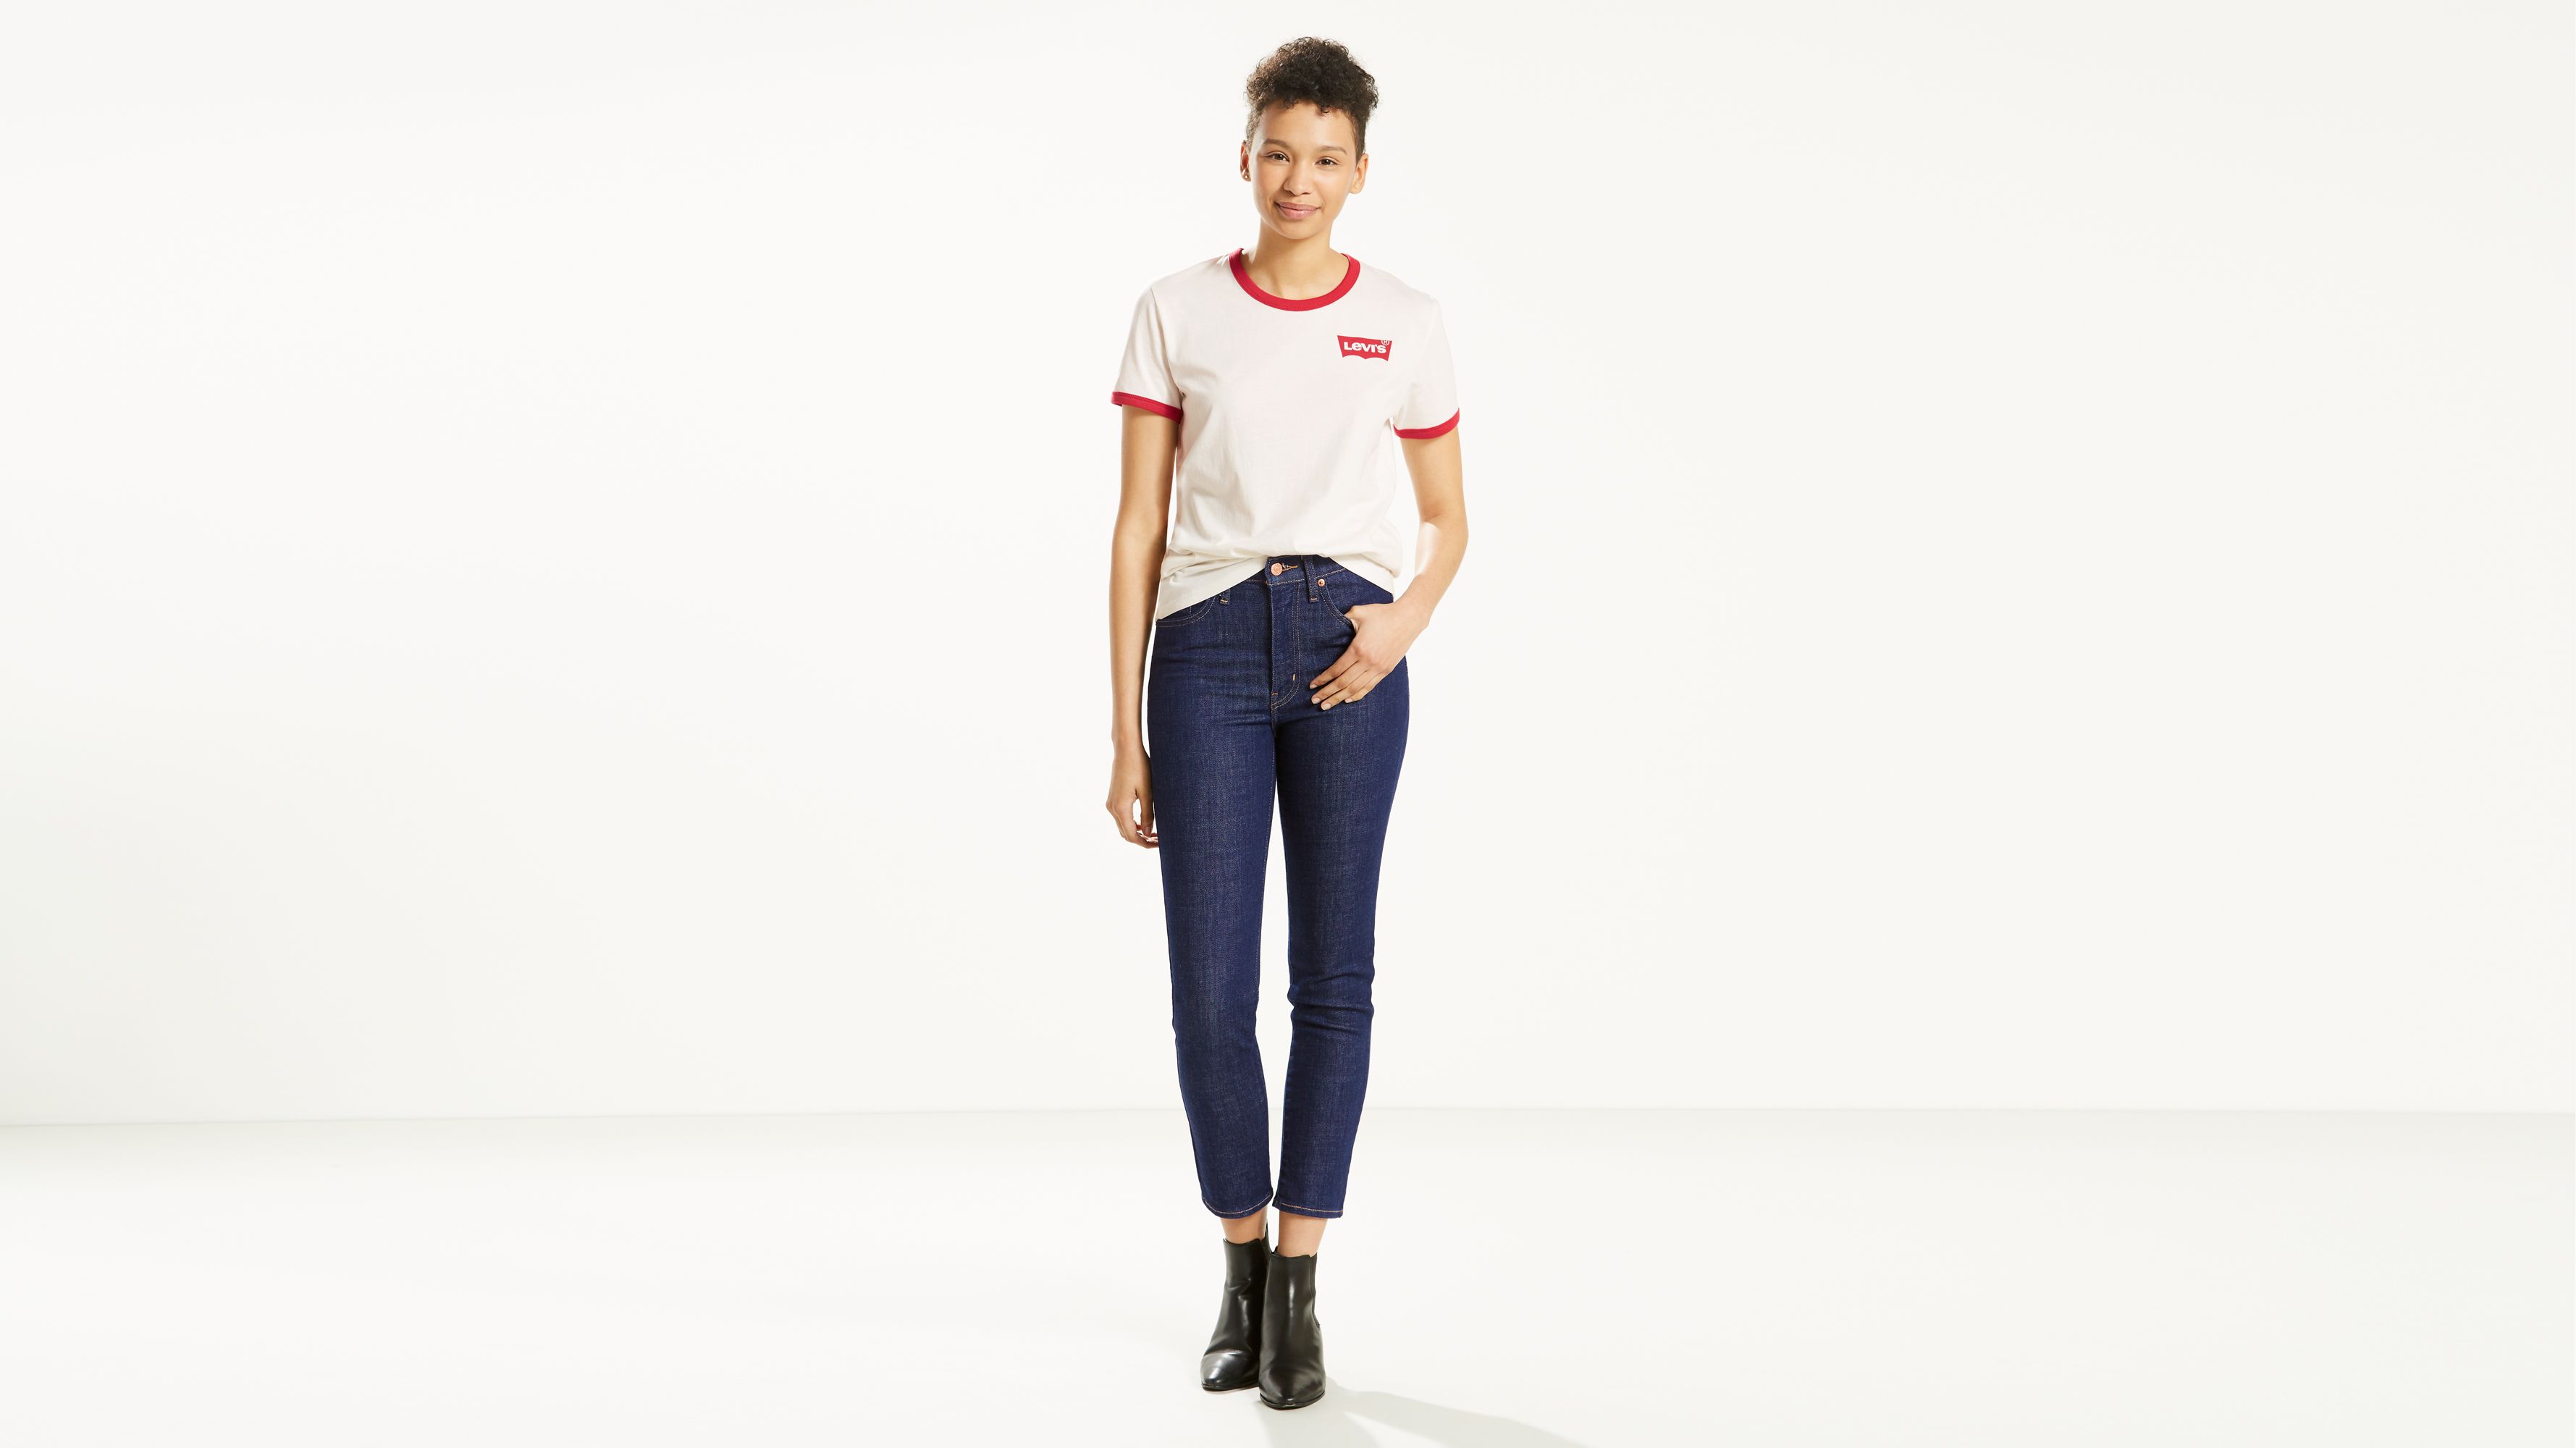 levi's mile high slim cropped jeans